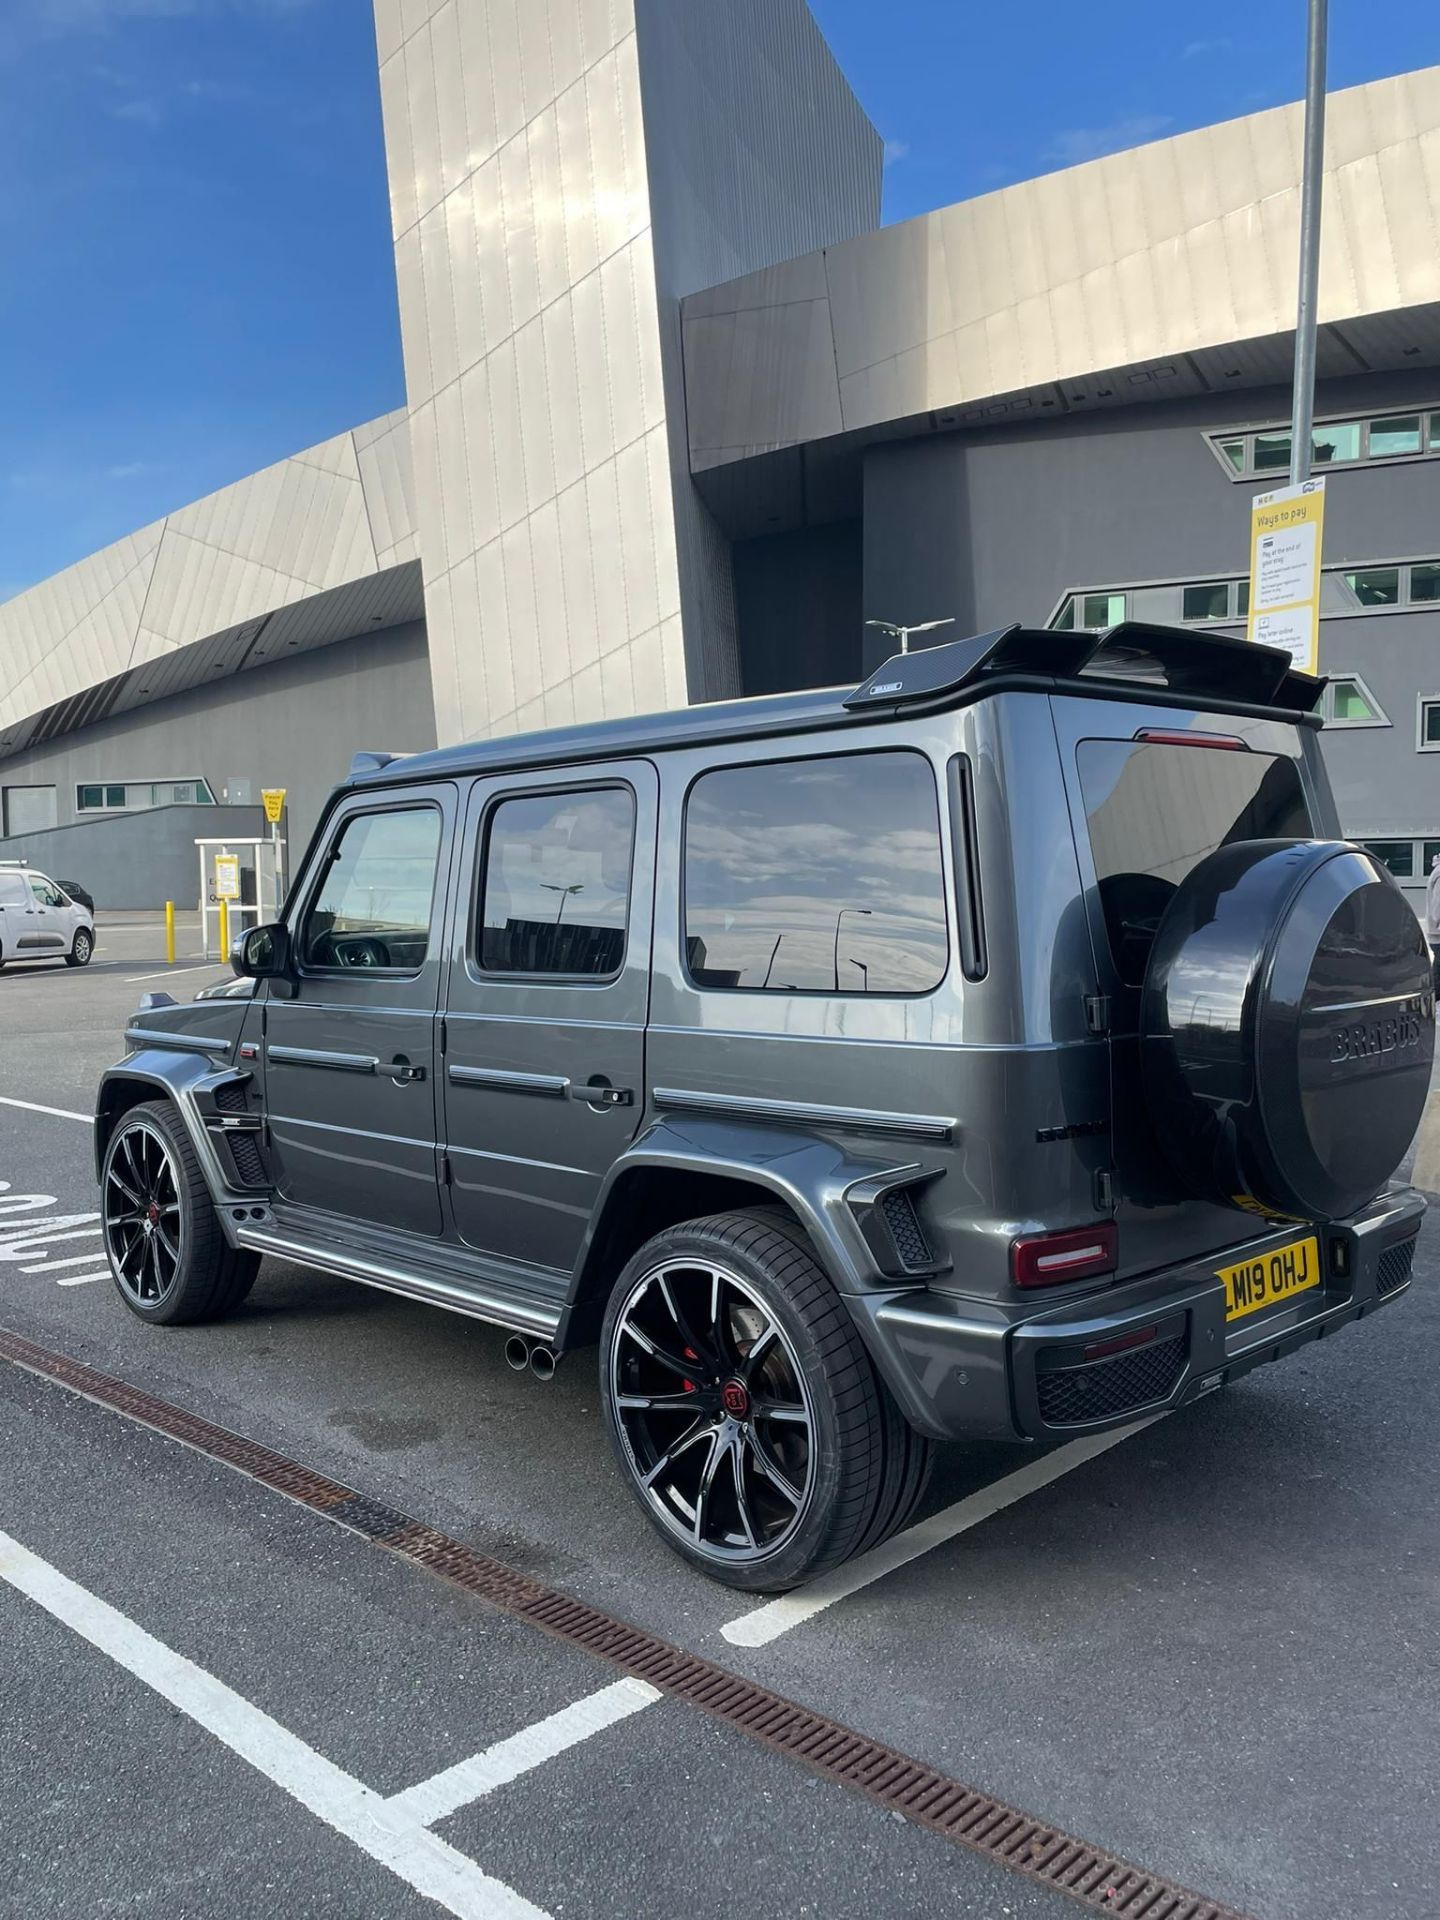 MERCEDES G63 BRABUS WIDE-STAR 800 STYLING GREY WITH BLACK LEATHER INTERIOR - Image 6 of 23